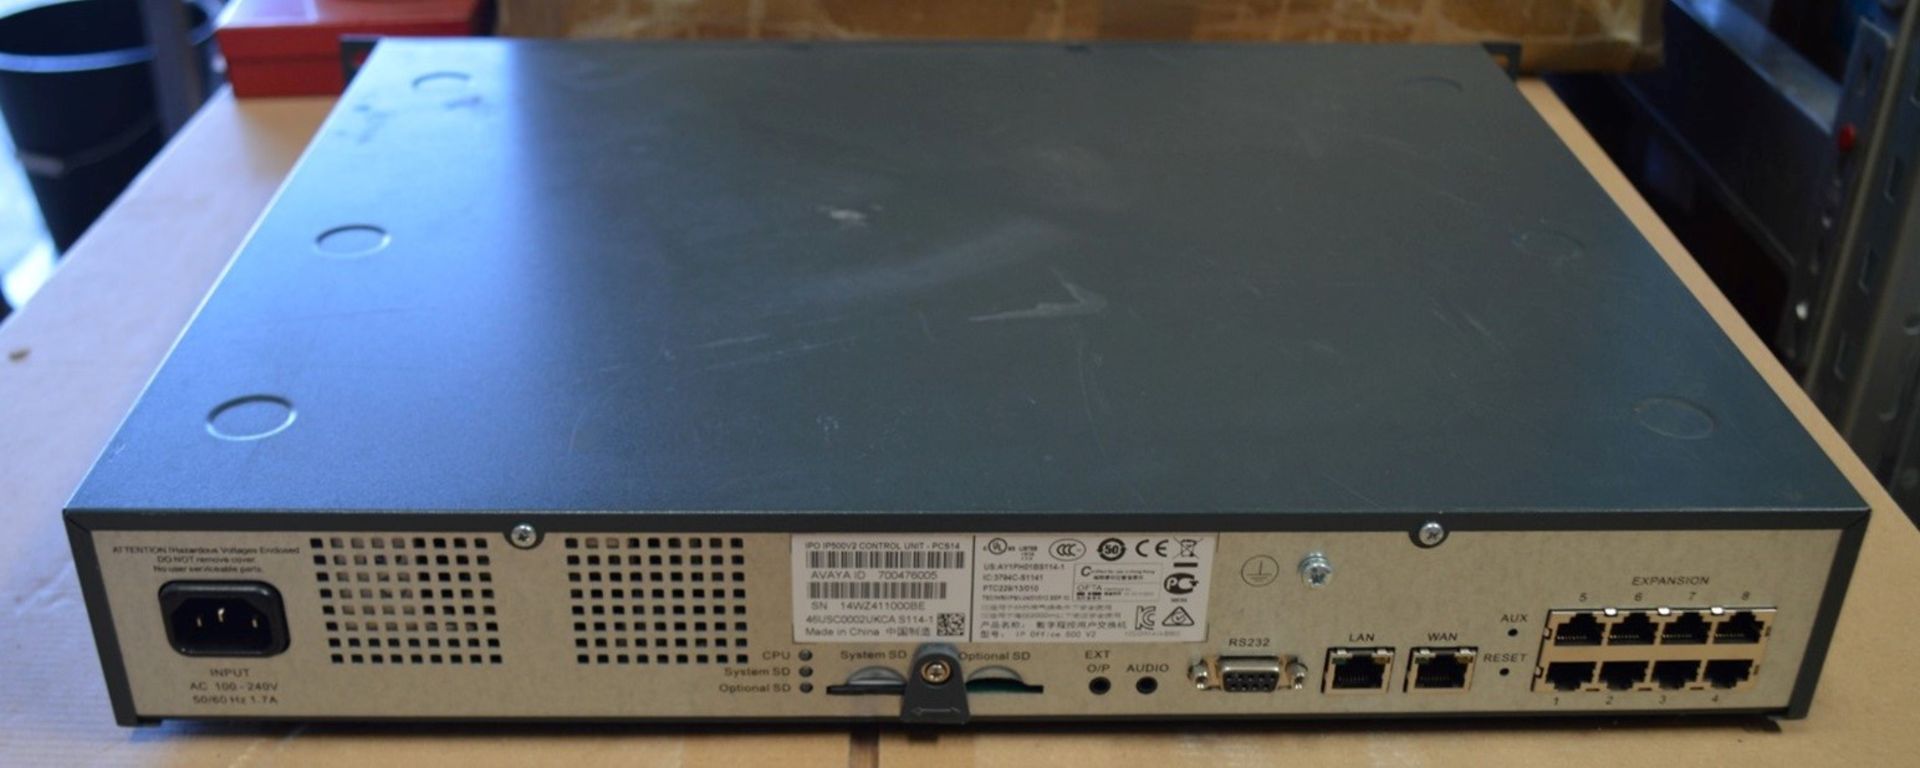 1 x Avaya IP Office 500 V2 Control Unit - Used, From A Working Environment - Ref637 - WH2 - - Image 5 of 5